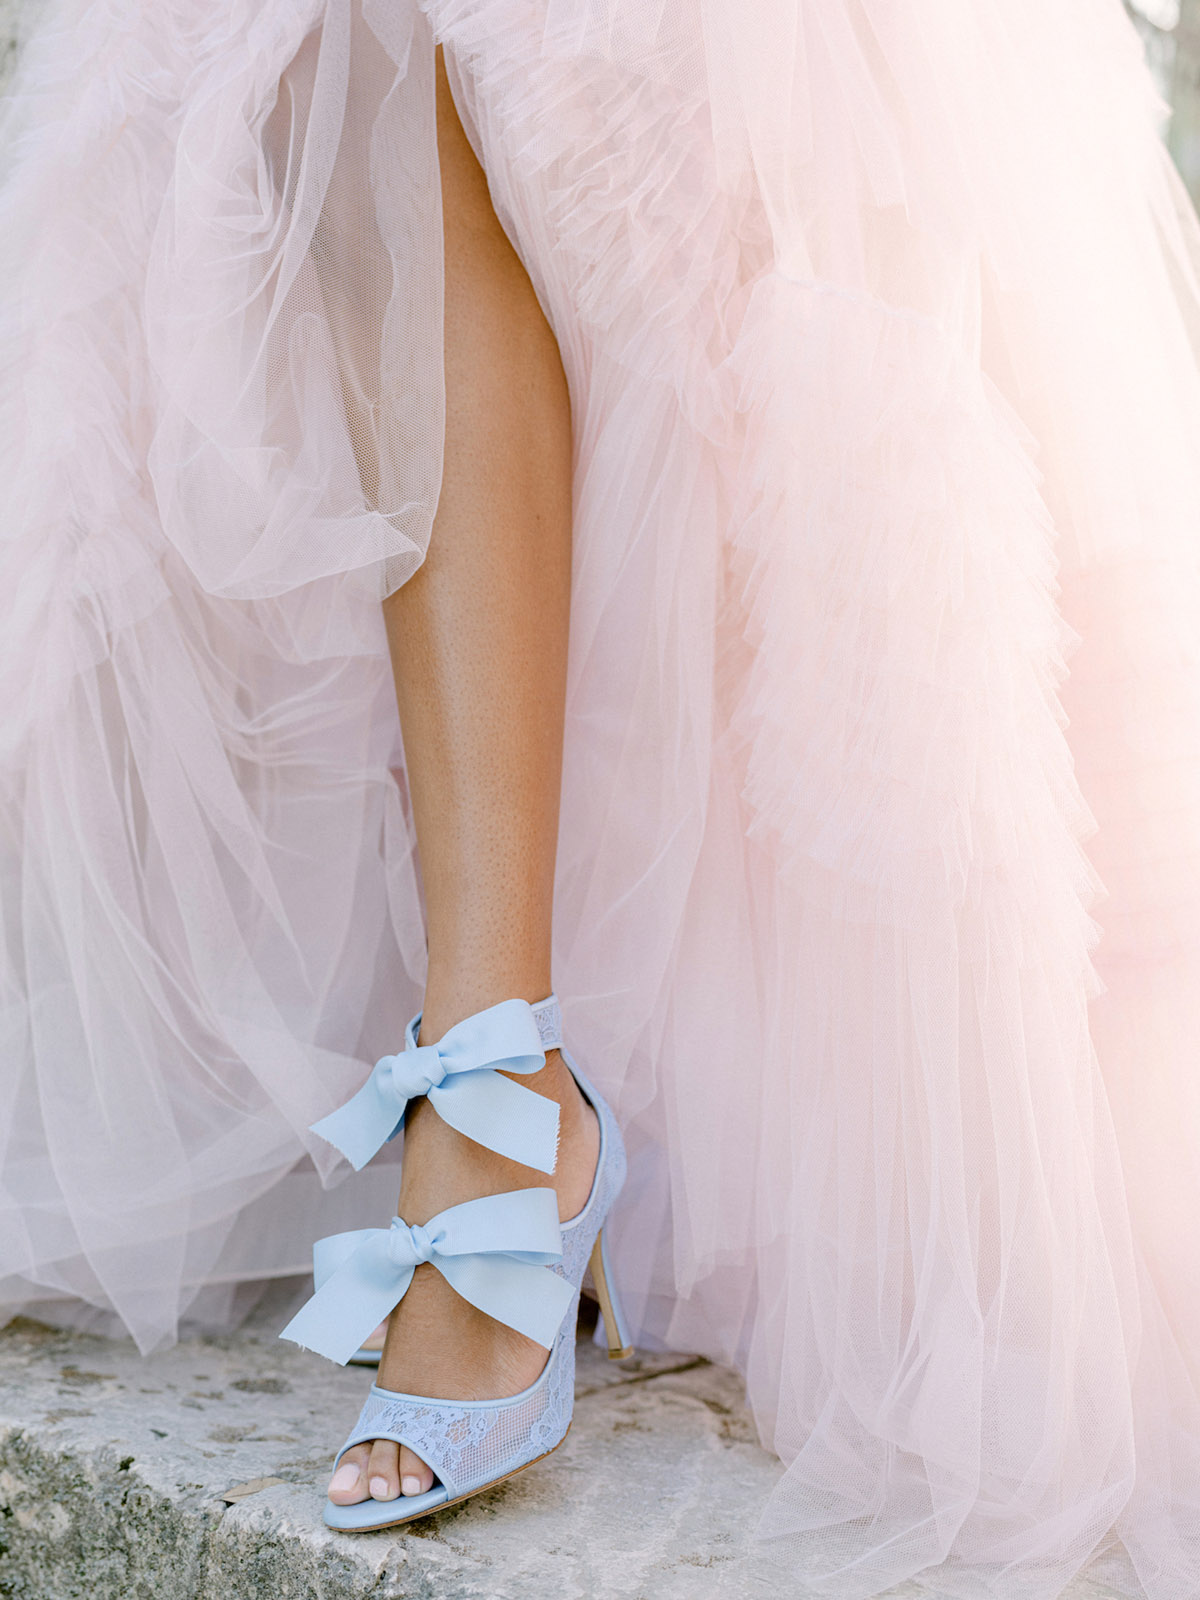 Pale blue Belle Belle wedding shoes with ribbons